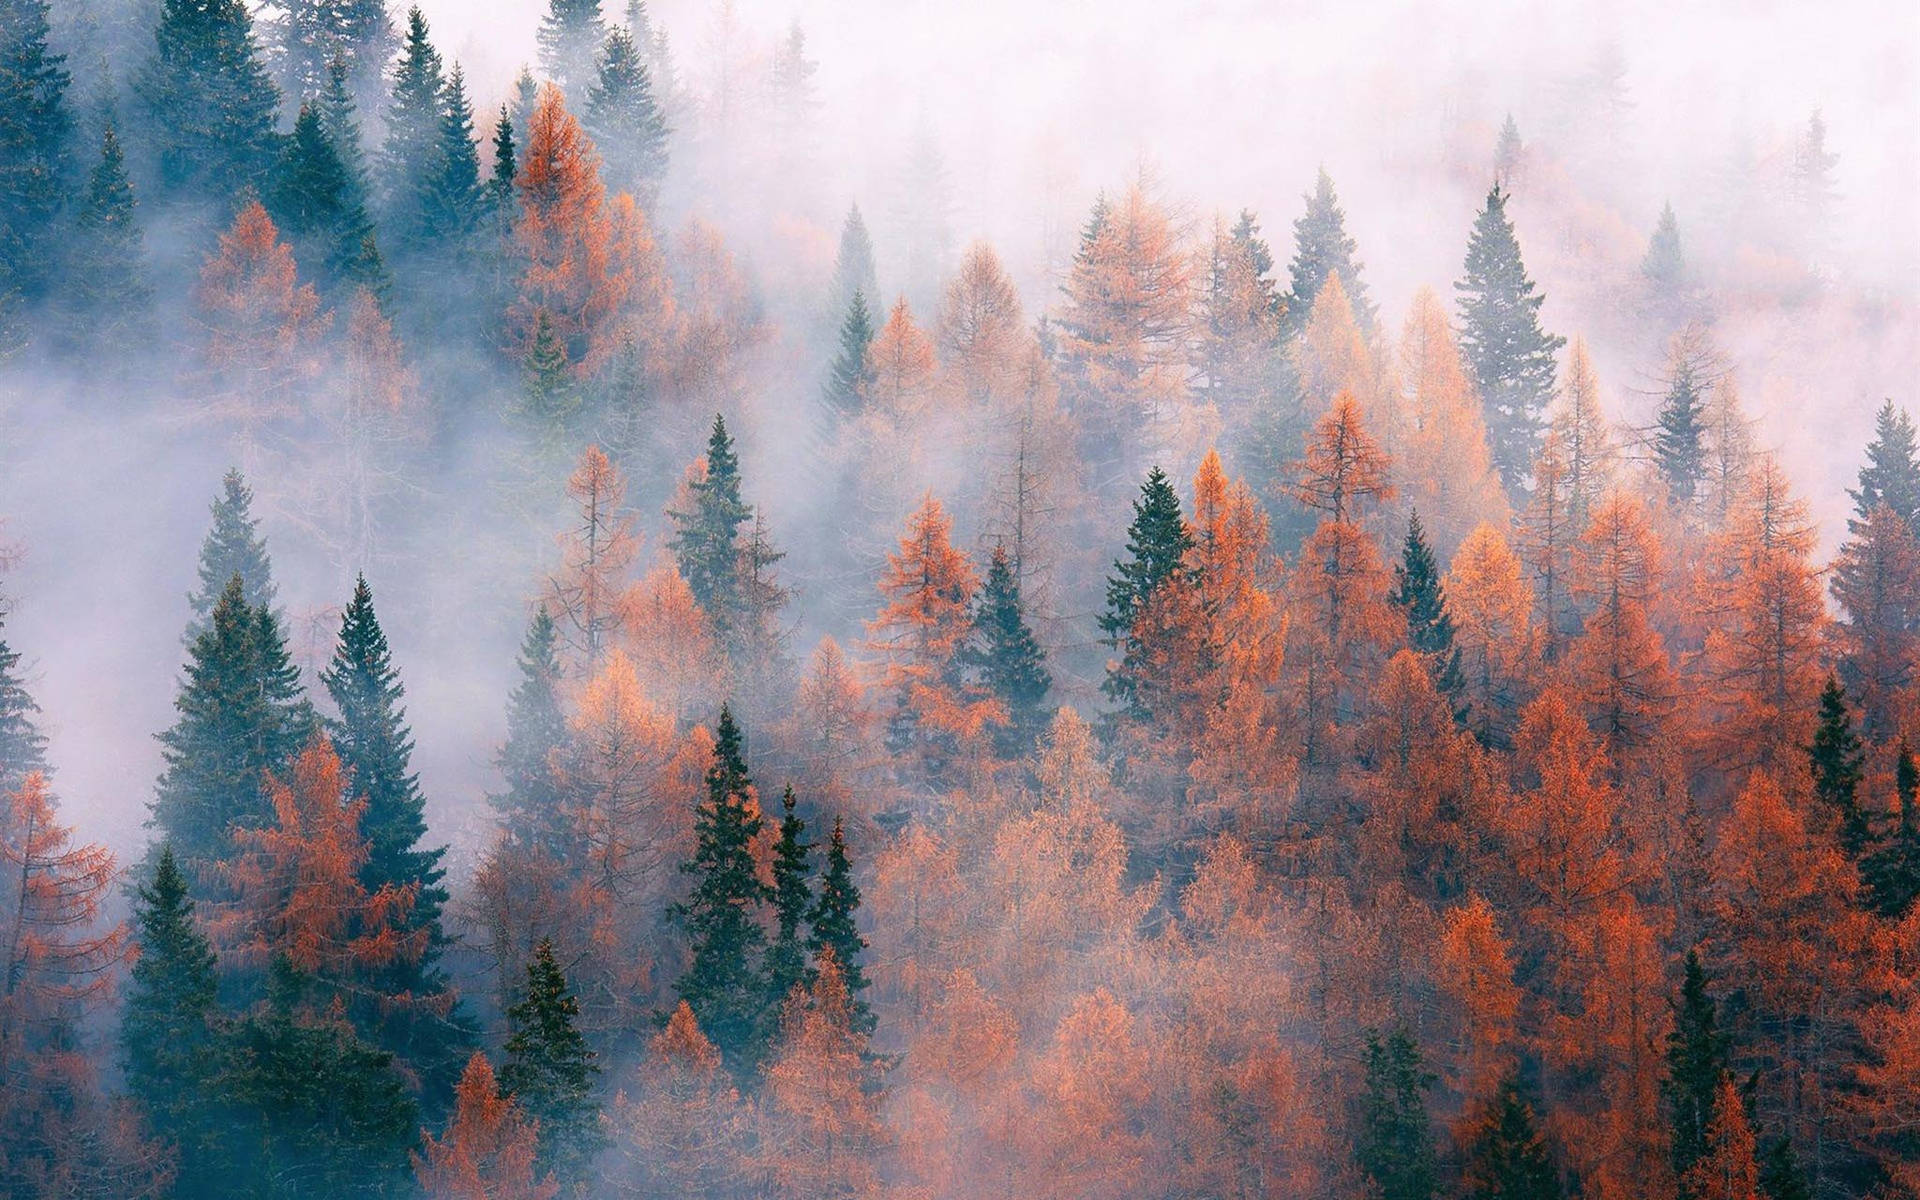 Enchanted Autumn - Foggy Pine Forest